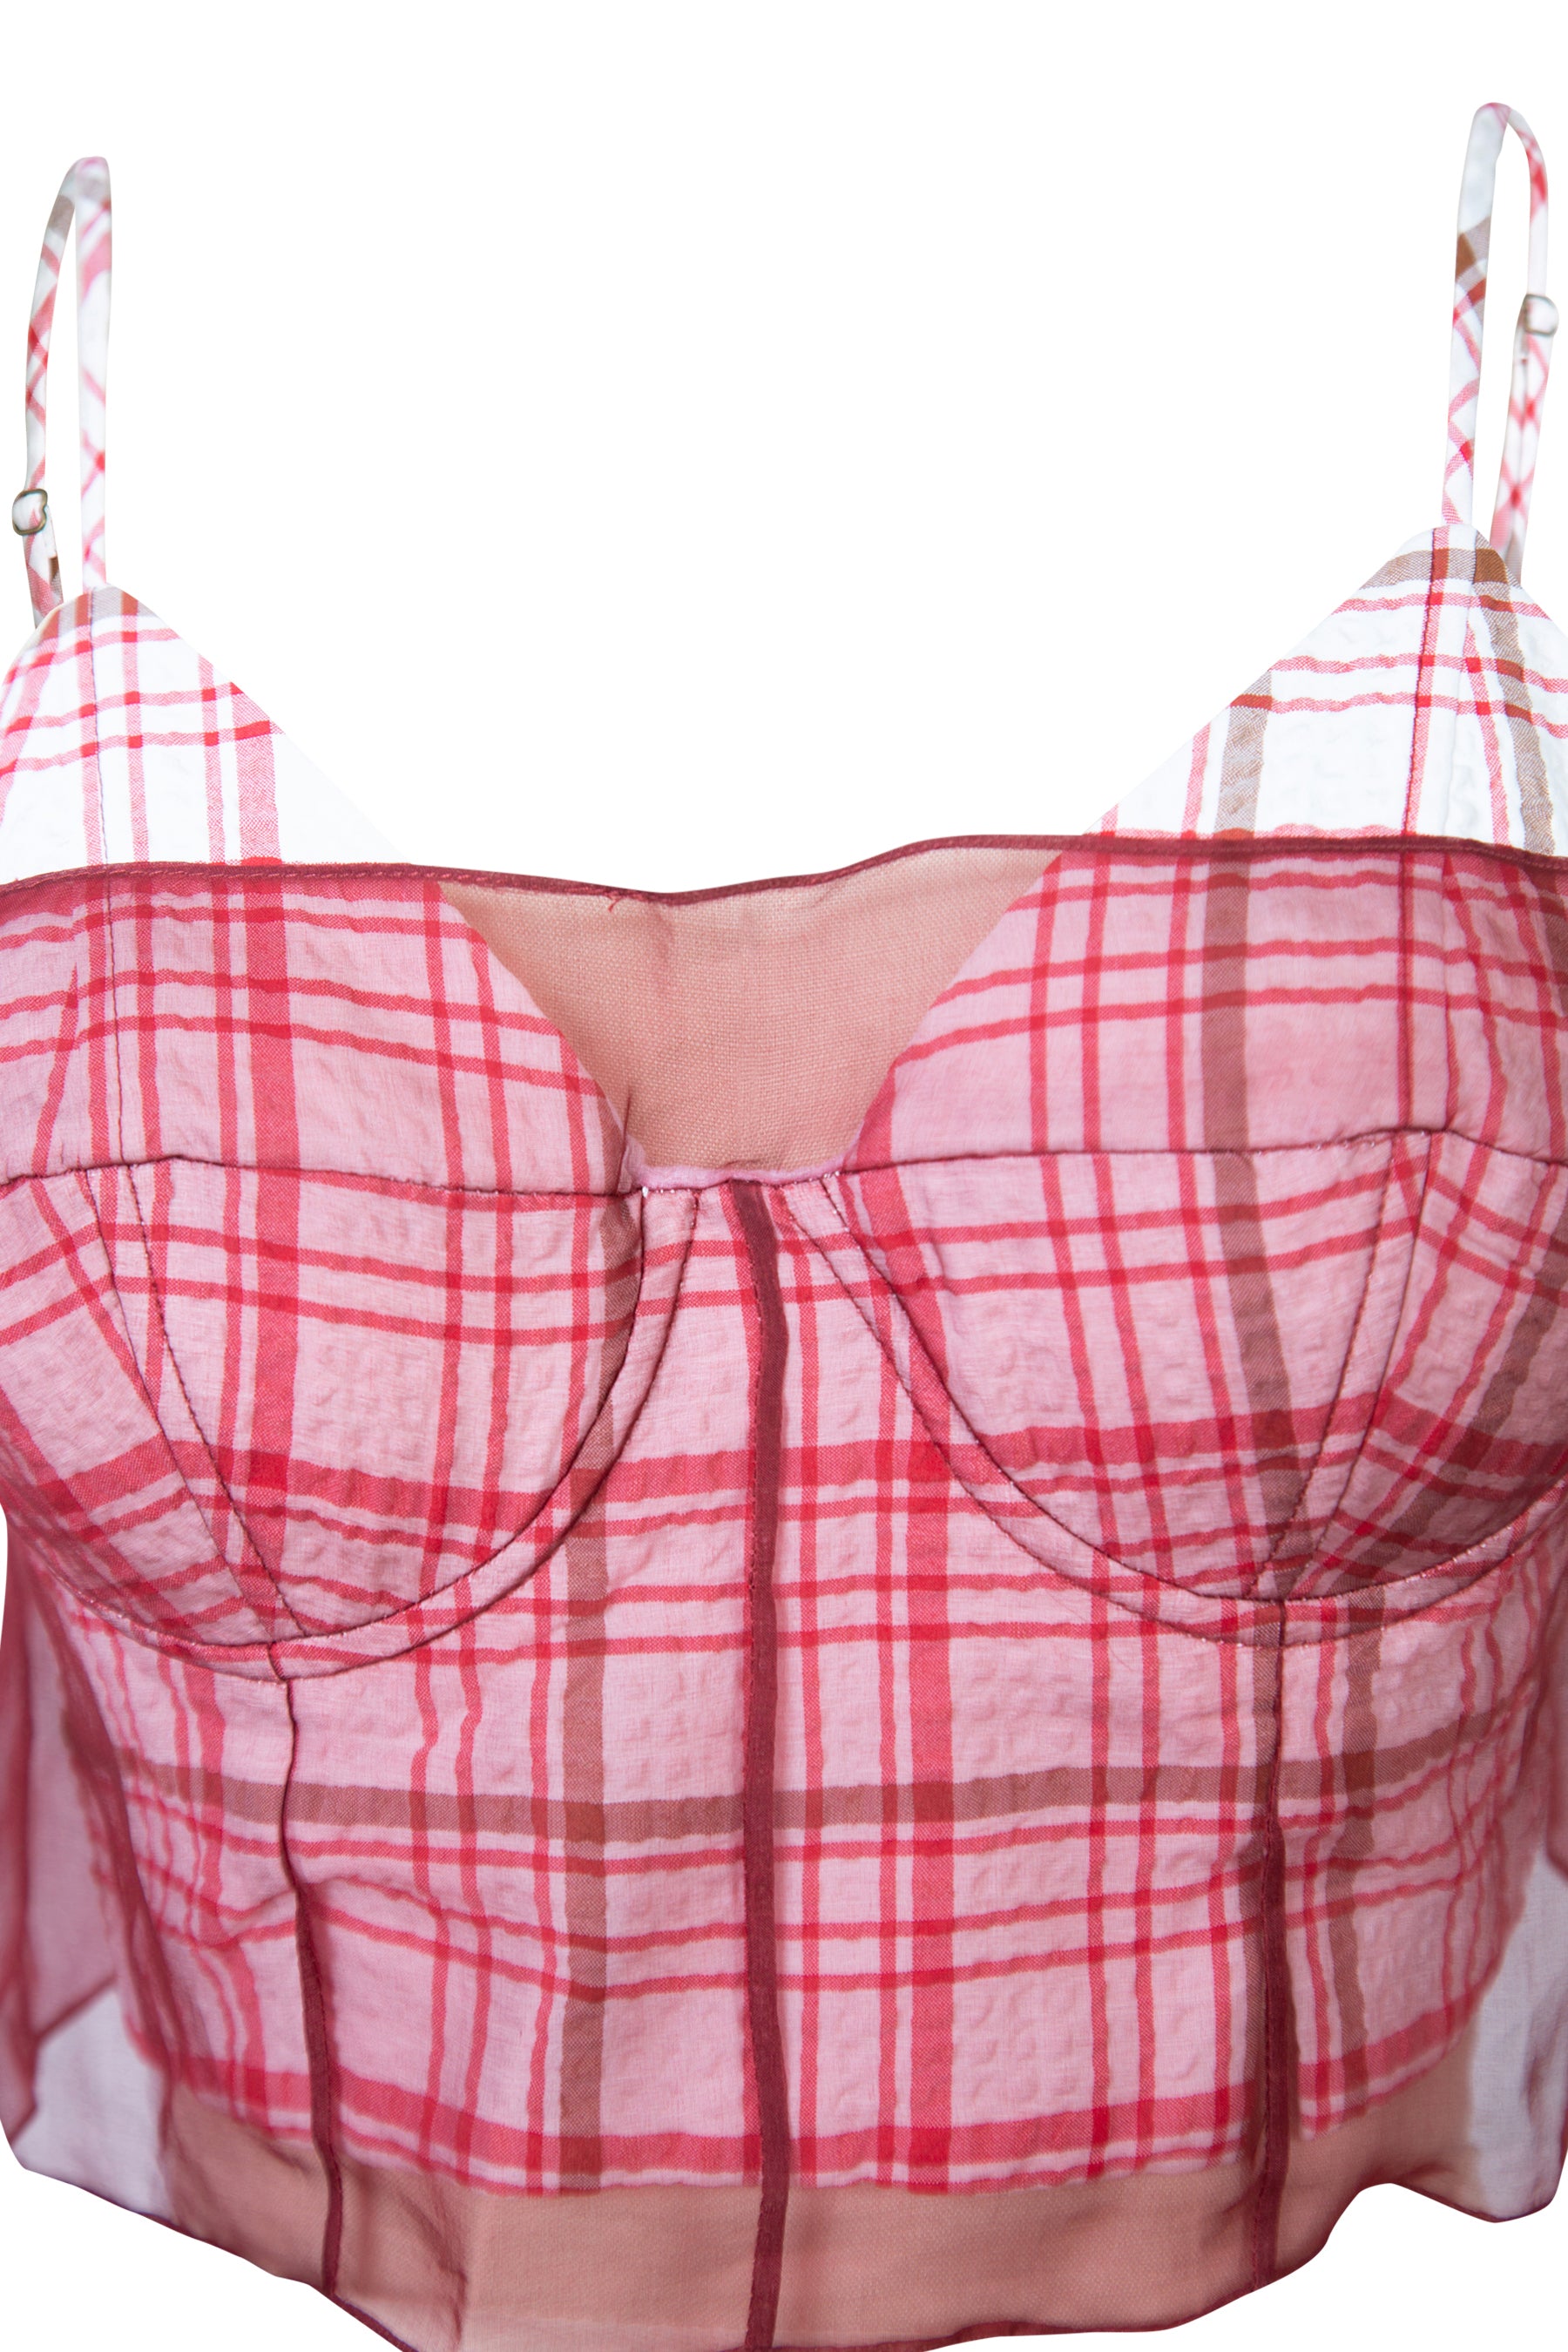 Sass & Bide Check Me Up Plaid Bustier Top In Pink